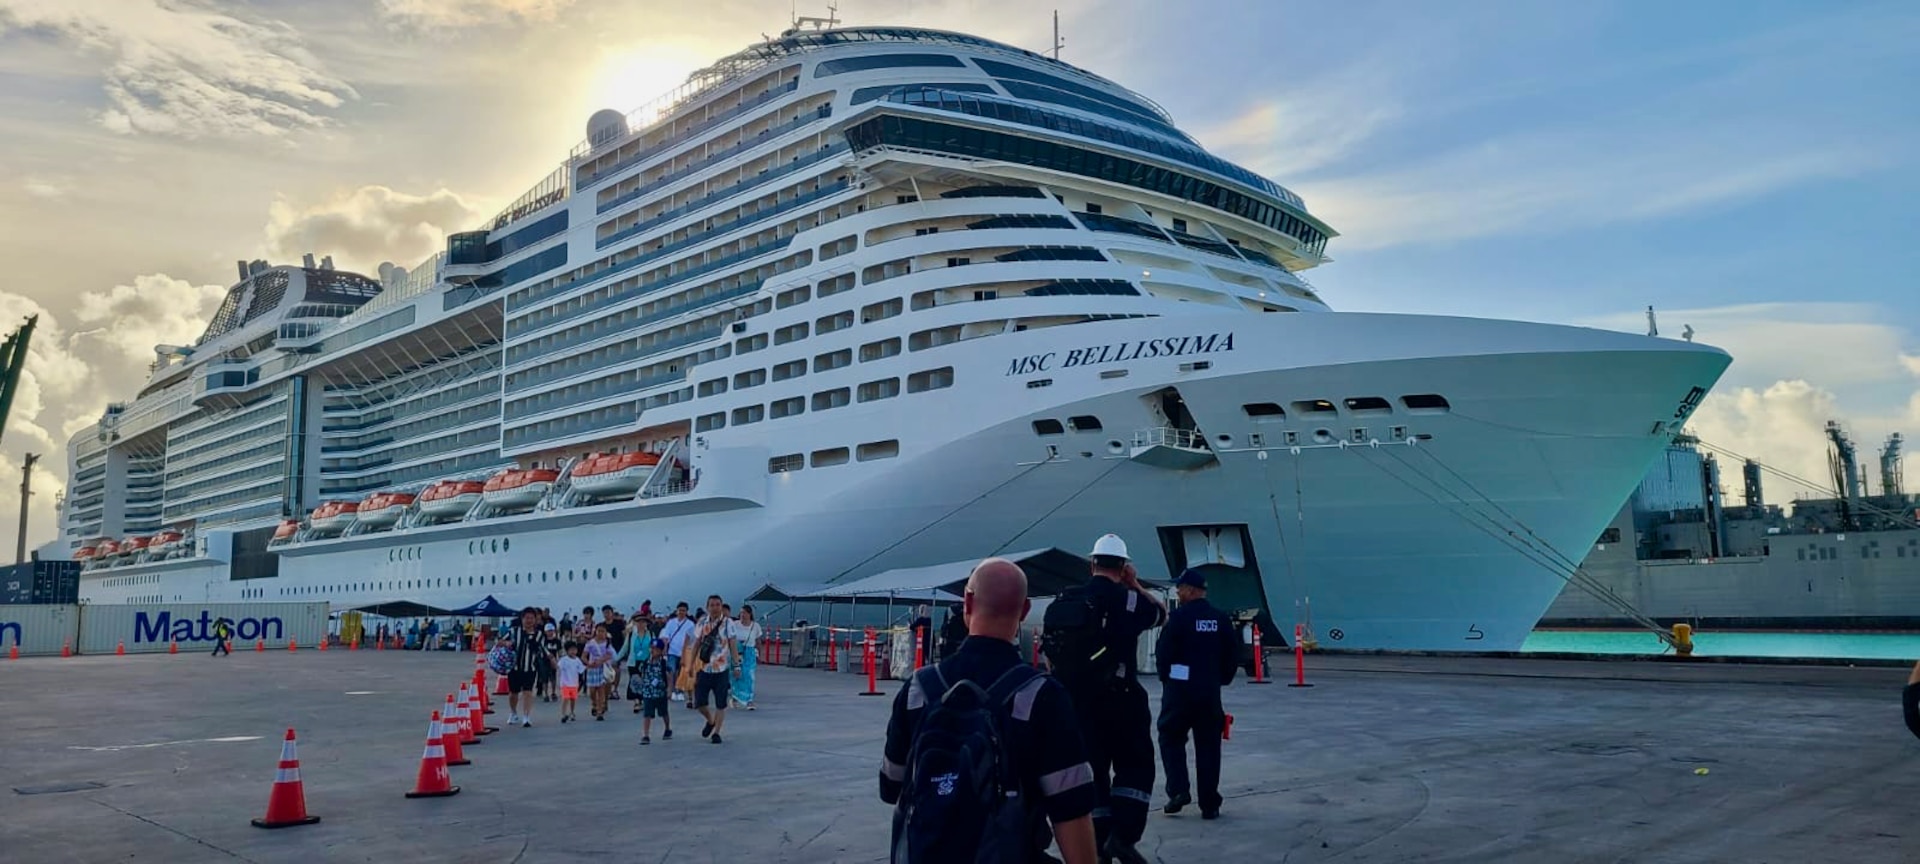 A team from U.S. Coast Guard Forces Micronesia/Sector Guam and the U.S. Coast Guard Cruise Ship National Center of Expertise conduct a Certificate of Compliance (COC) exam on the 1,036-foot Maltese-flagged cruise ship MSC Bellissima on its first-ever U.S. port call at the Port of Guam, on Jan. 3, 2024. The U.S. Coast Guard conducts COC exams for new or existing vessels that are embarking passengers from a U.S. port for the first time, carrying U.S. citizens as passengers with initial port calls at U.S. ports, or have undergone significant modifications or alterations including changes that affect structural fire protection or means of egress, in order to ensure these vessels, meet required safety and regulatory standards. (U.S. Coast Guard photo by Chief Warrant Officer Jennifer Thomas)